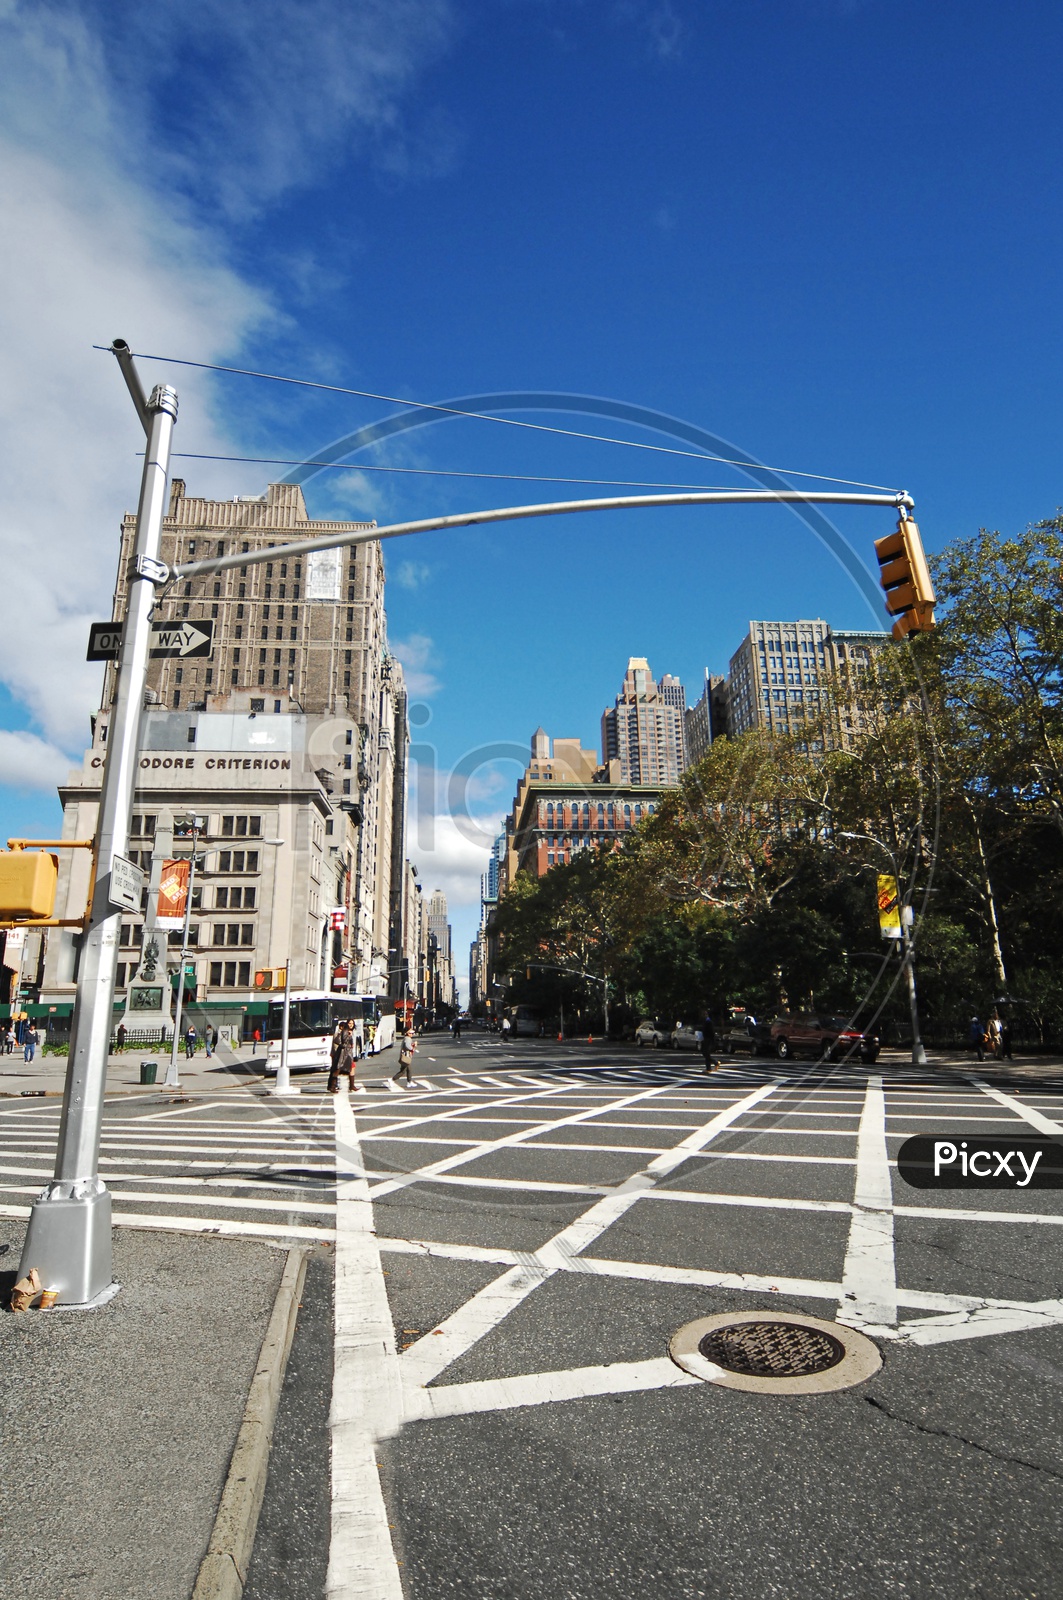 Traffic signal at a junction in New York